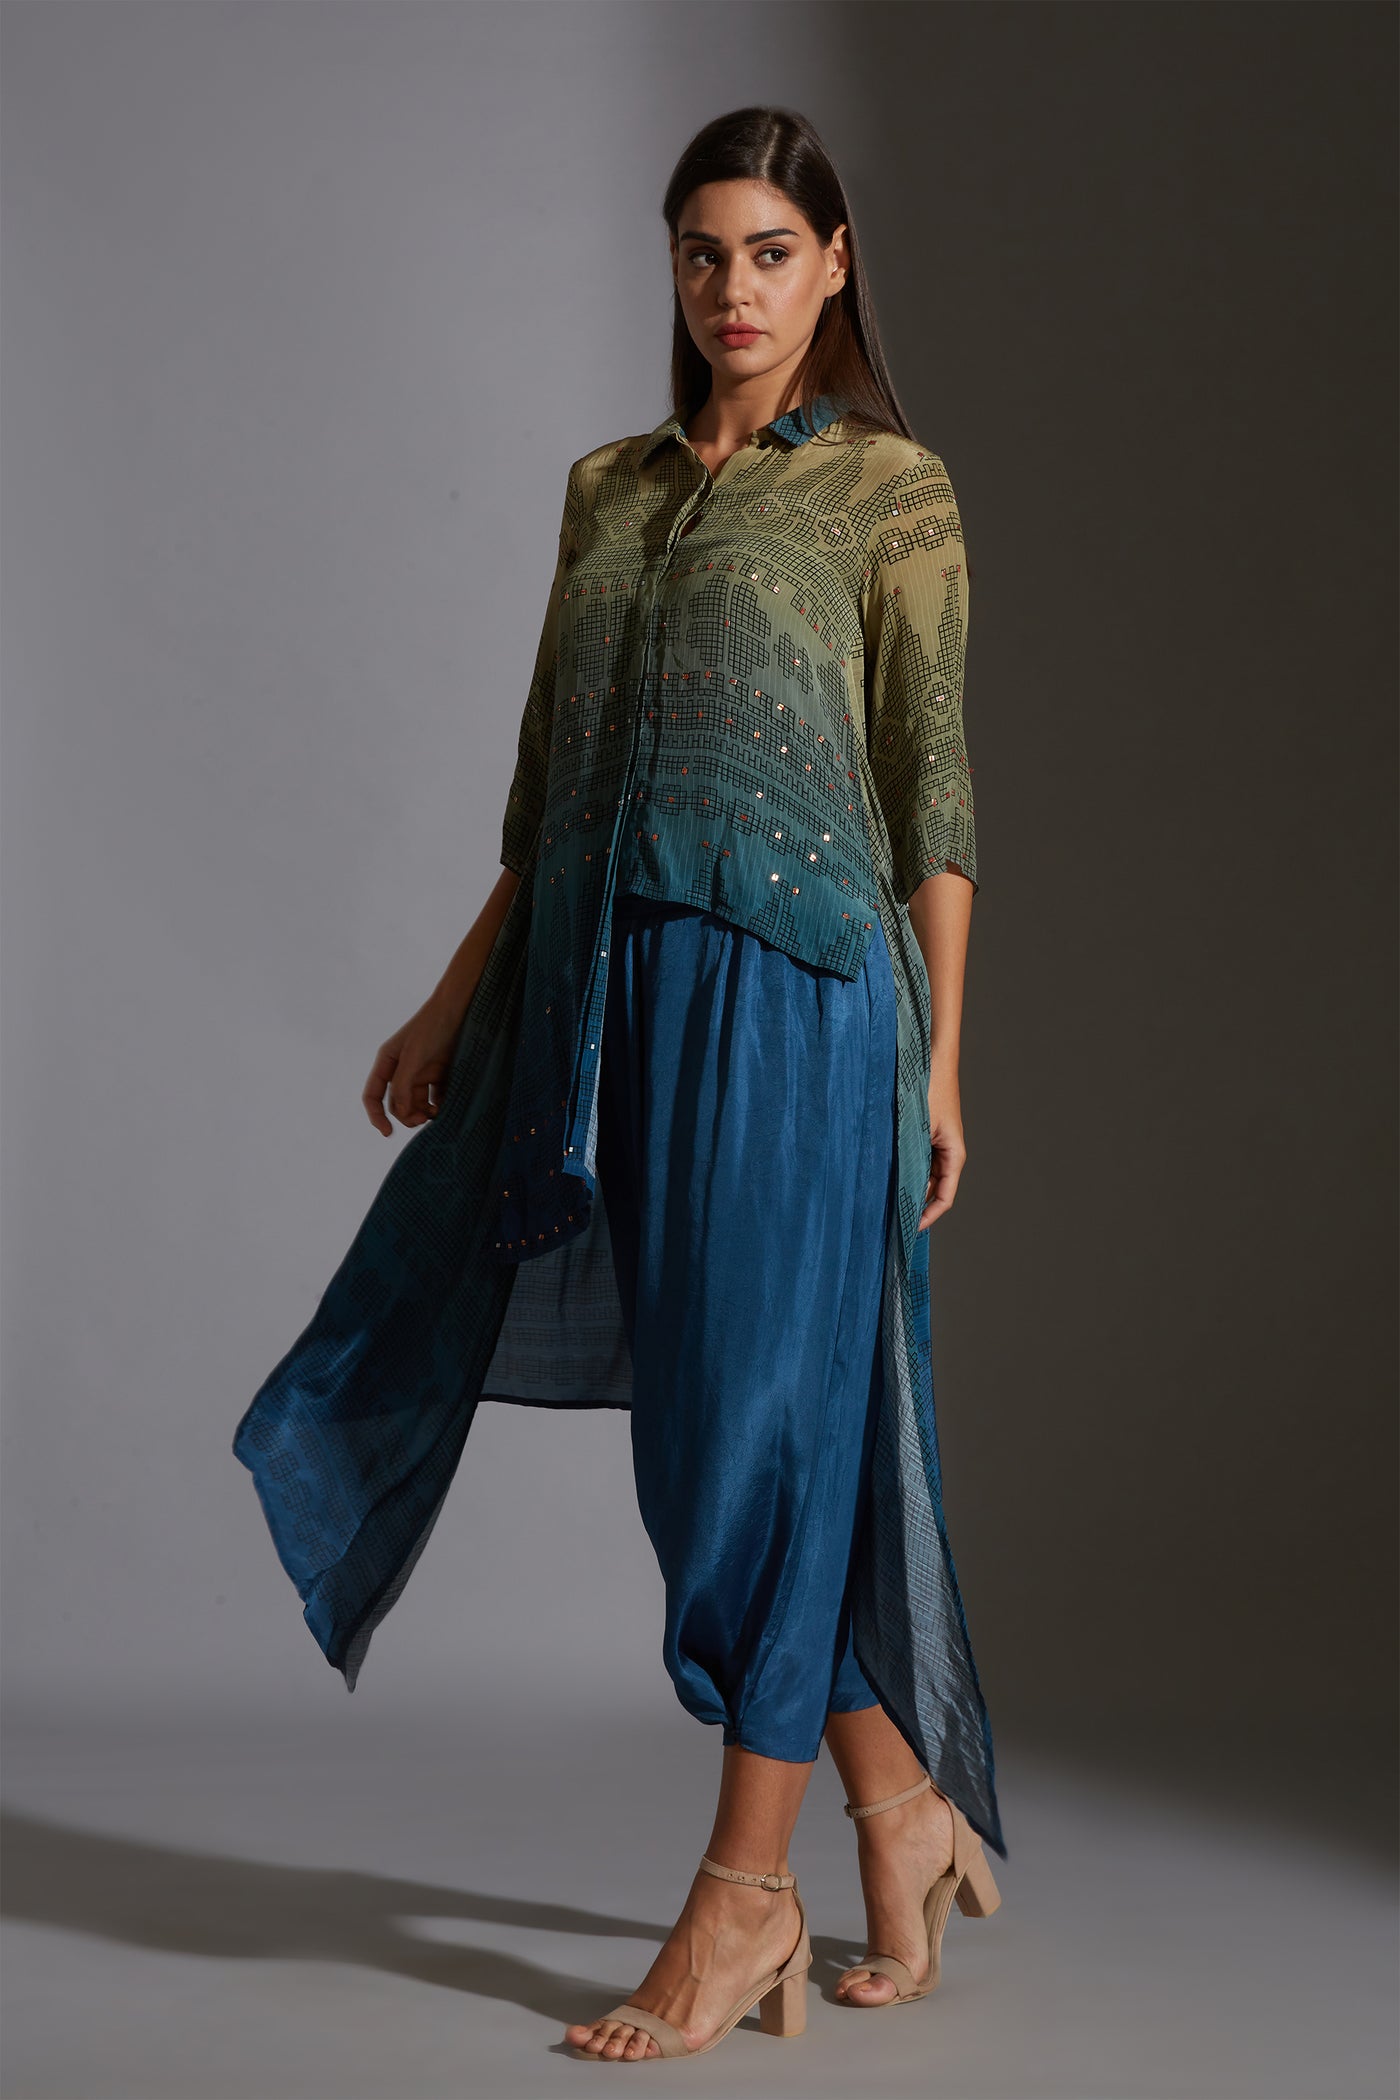 sougat paul Printed asymmetrical top with mirror embroidery paired with dhoti green blue fusion online shopping melange singapore indian designer wear